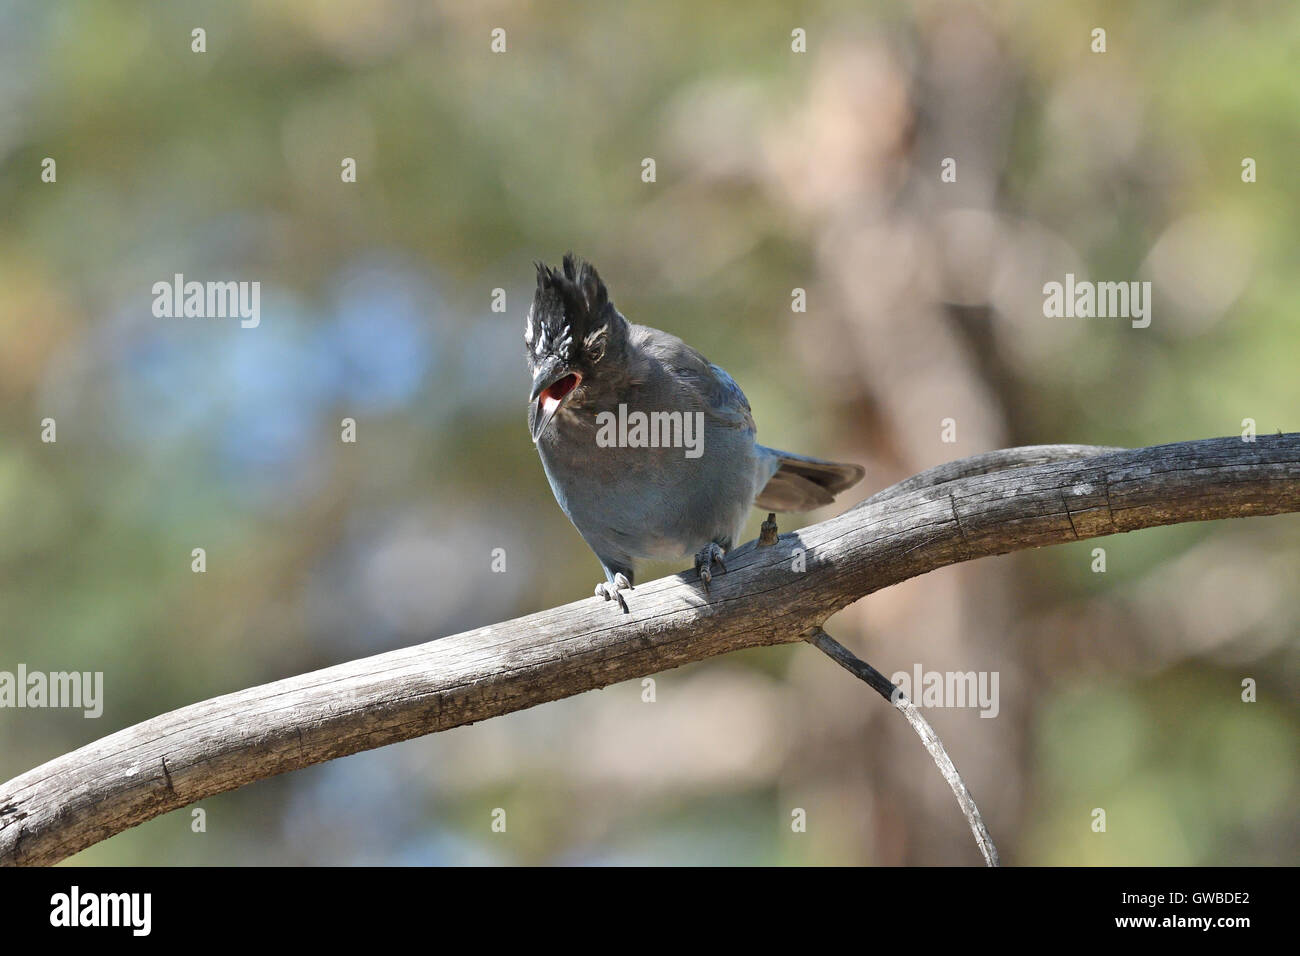 Steller's Jay perched on a tree branch and squawking. Stock Photo